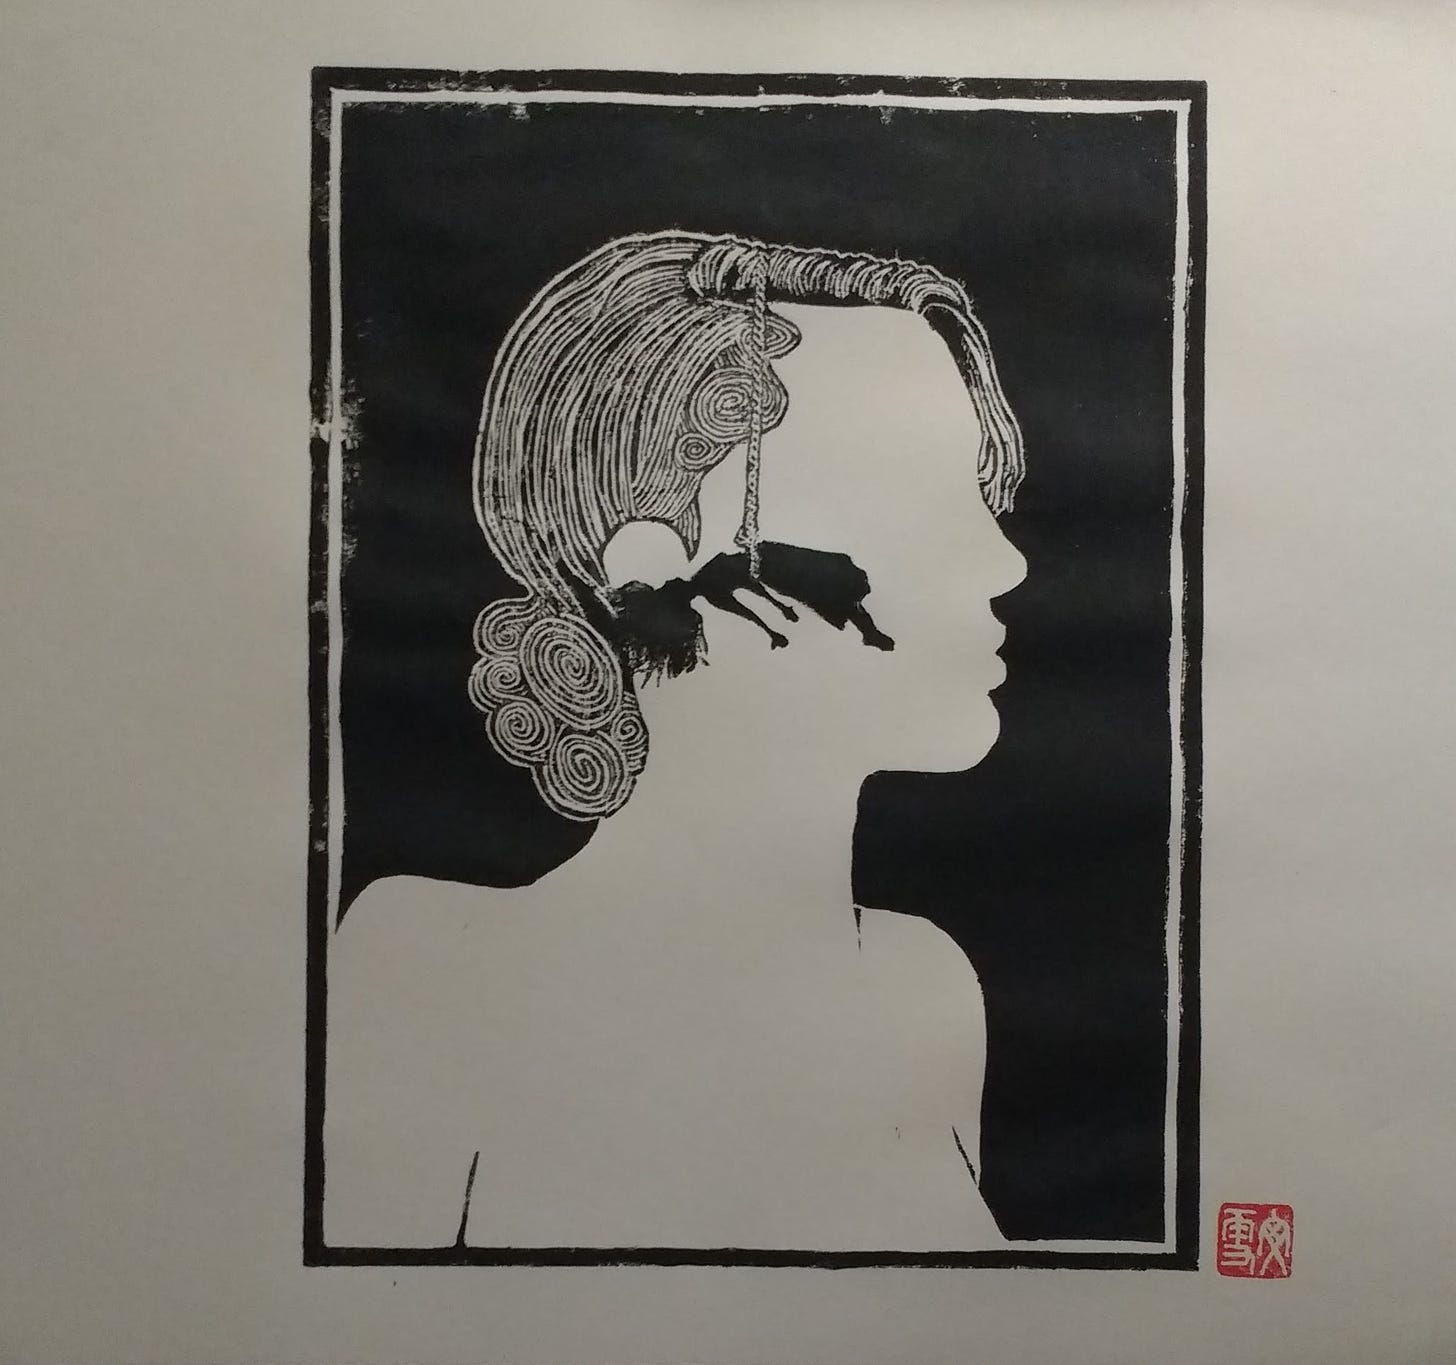 A linocut print of a woman's face. Inside her head is a woman hanging by a rope (or hair) from her waist.